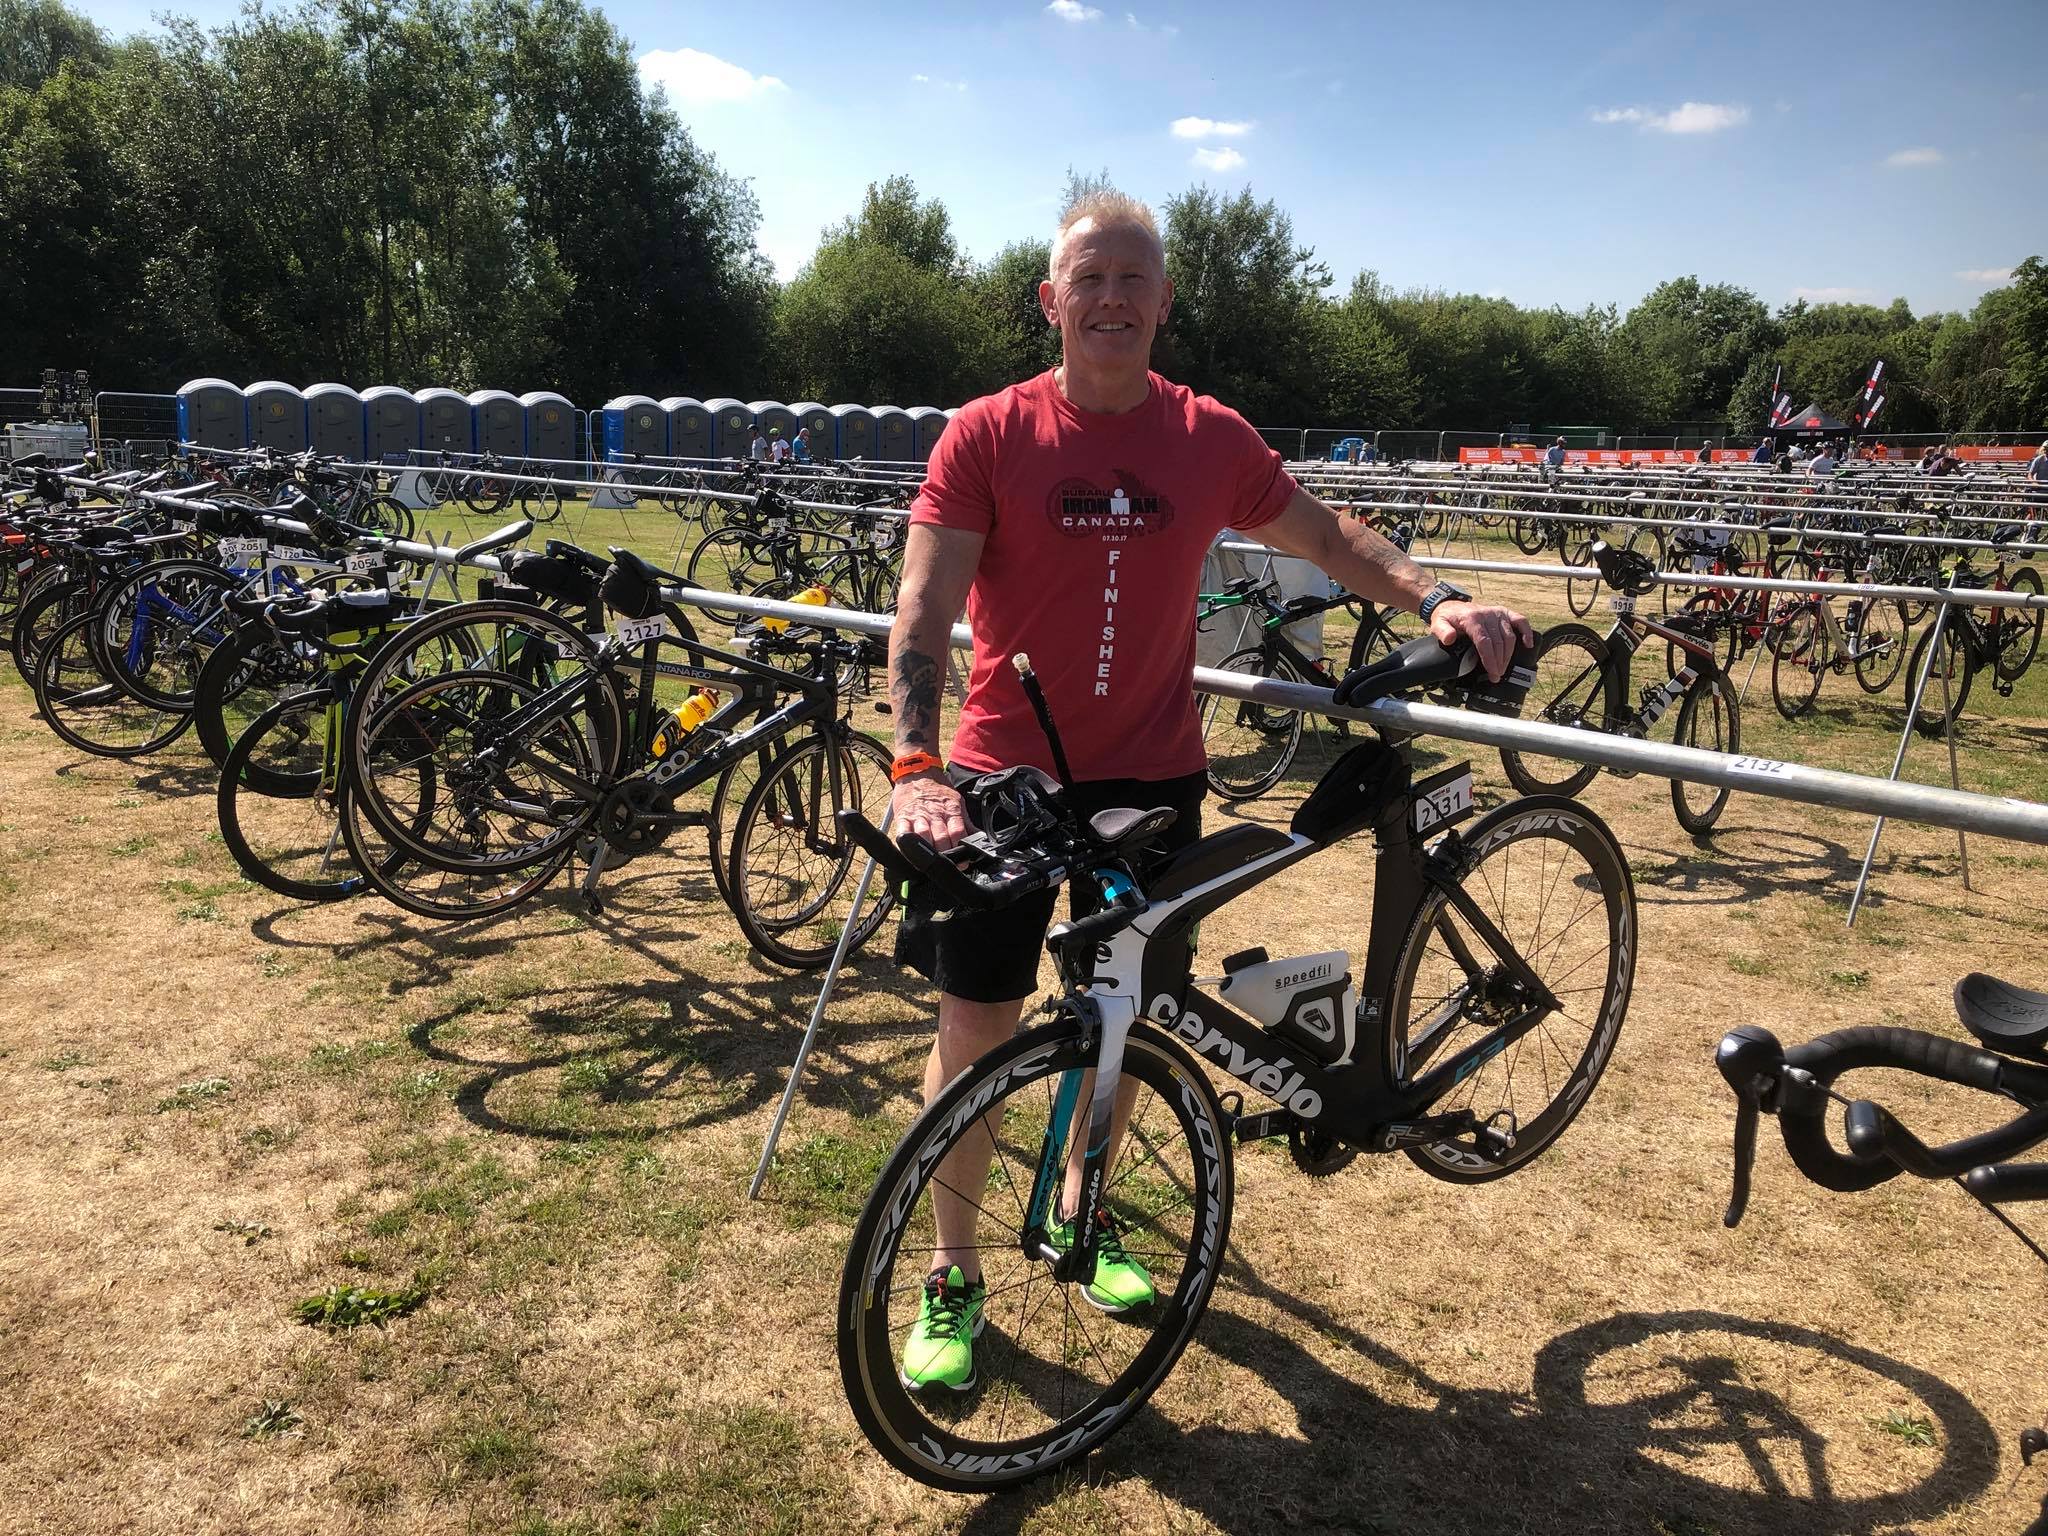 Coach_Terry_Wilson_Pursuit_of_The_Perfect_Race_IRONMAN_Bolton_United_Kingdom_Kevin_Nuun_Transition_Bike_Rack.jpg